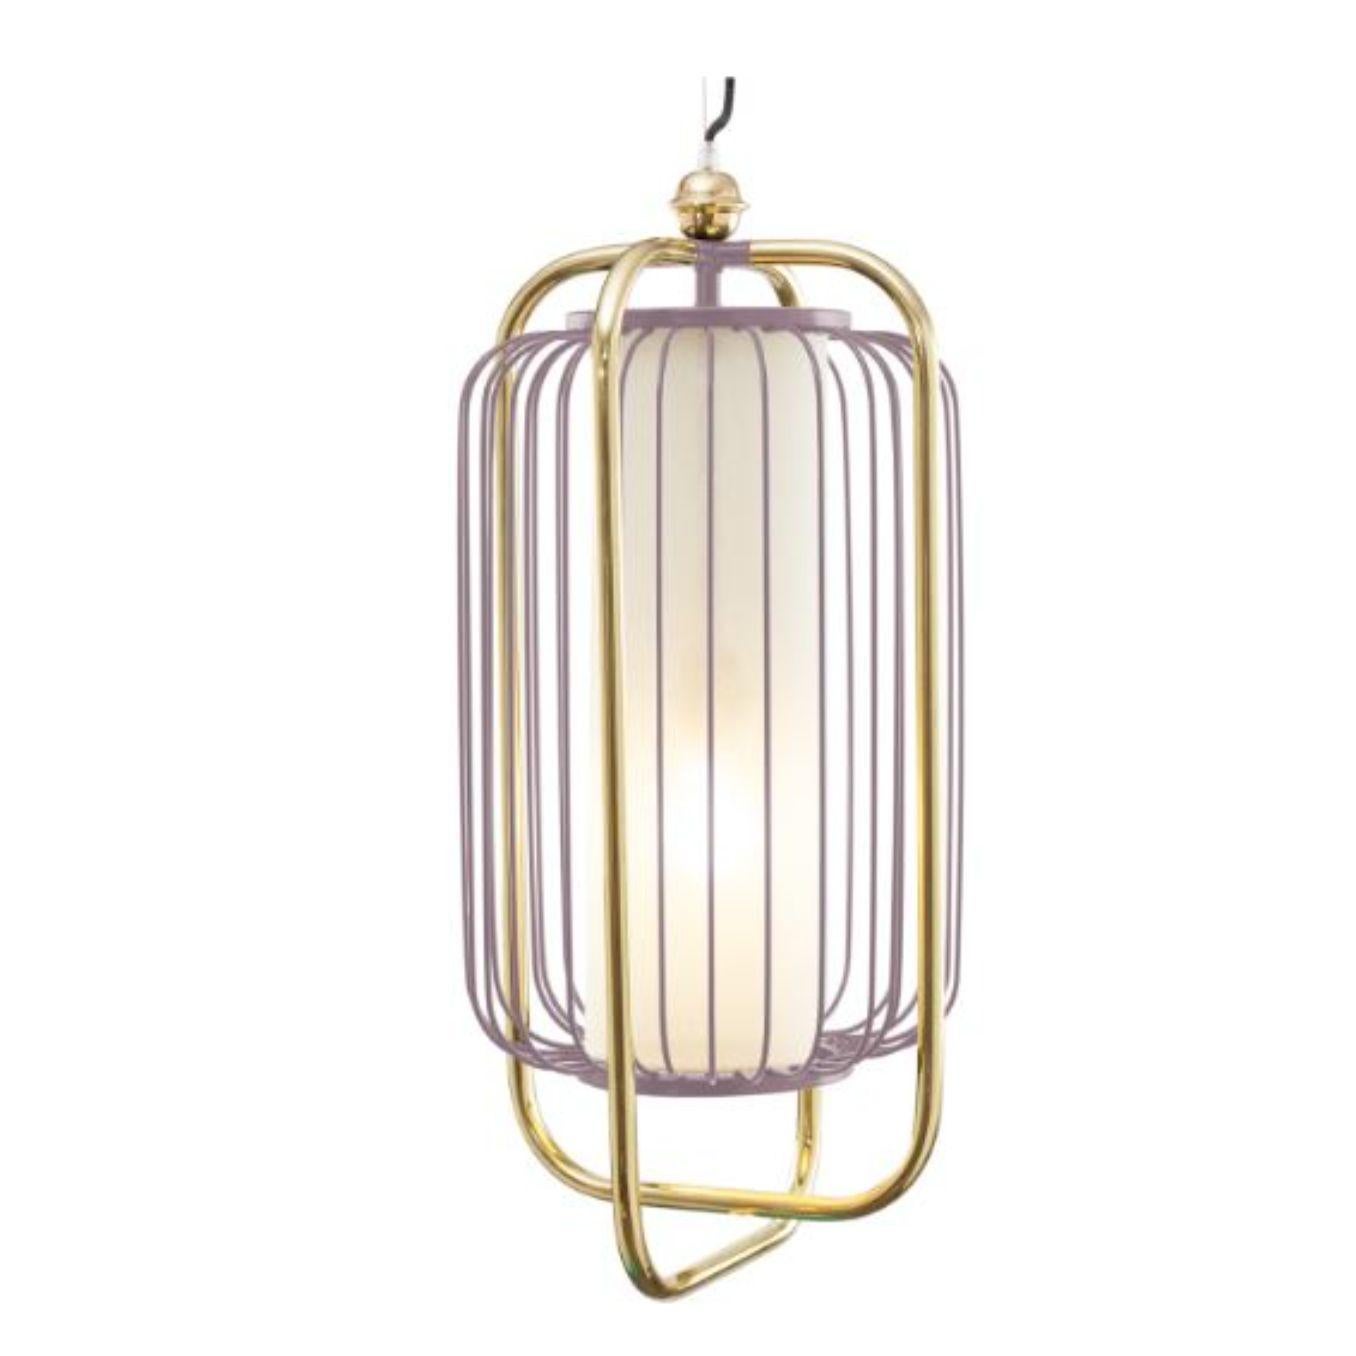 Brass and Lilac Jules II Suspension lamp by Dooq
Dimensions: W 30 x D 30 x H 64 cm
Materials: lacquered metal, polished or brushed metal, brass.
abat-jour: cotton
Also available in different colors and materials. 

Information:
230V/50Hz
E27/1x20W